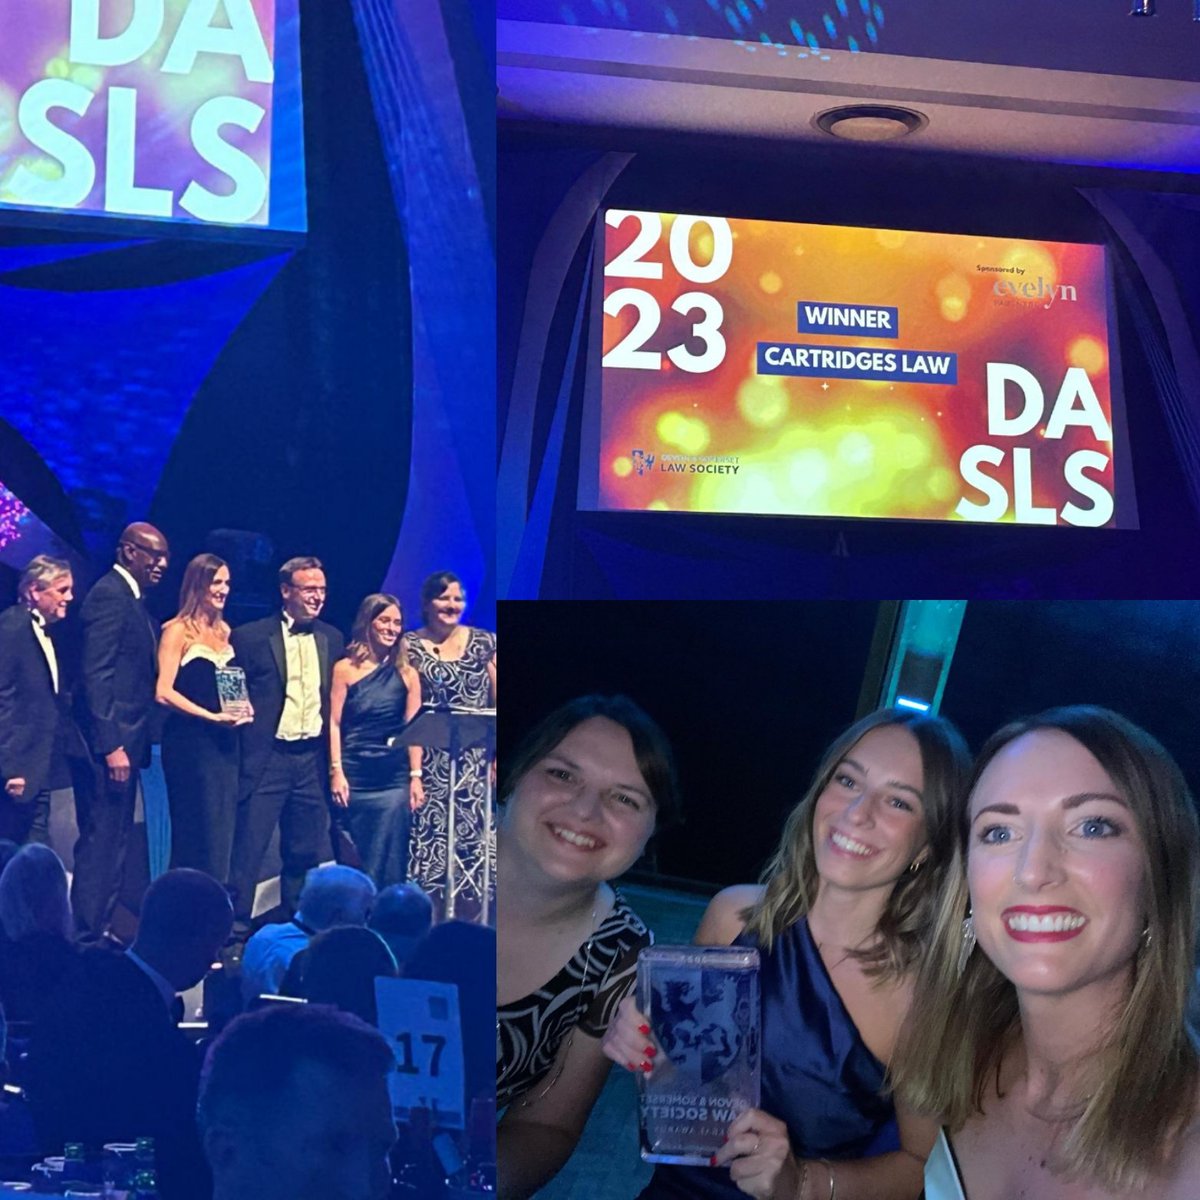 Huge congratulations to our dedicated Cartridges Green Team for winning the Sustainability Award @DSLawSociety #dasls #daslsawards2023 #exeterlawfirm #exetersolicitors
#Sustainability